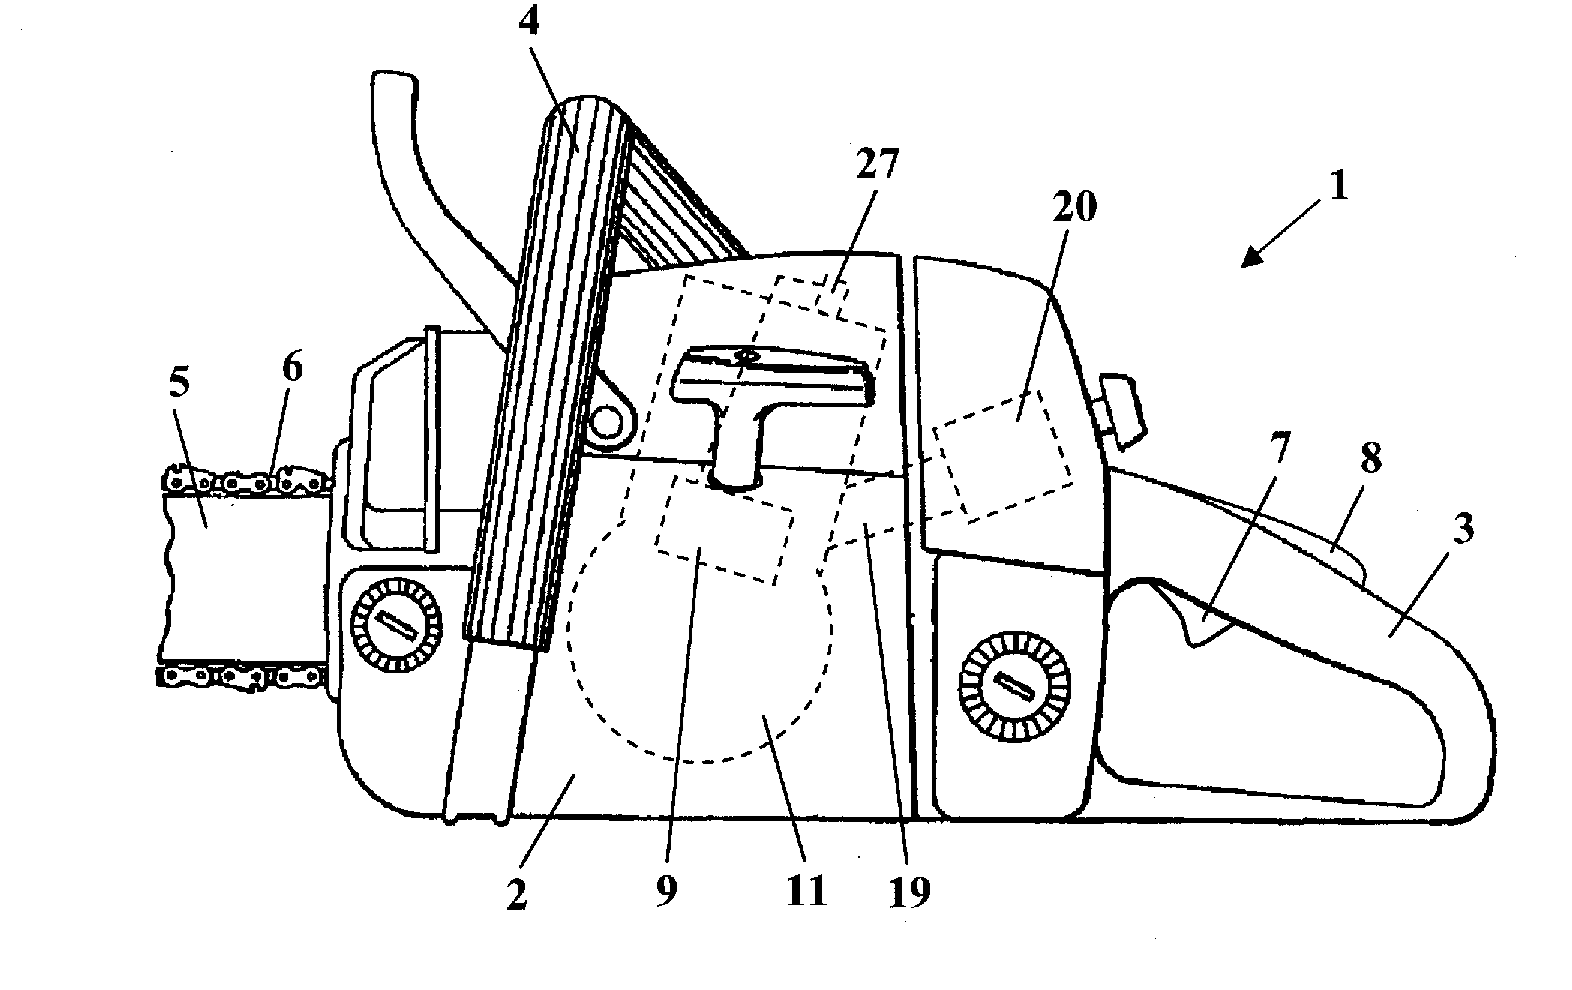 Method for Damage Diagnosis in a Handheld Work Apparatus